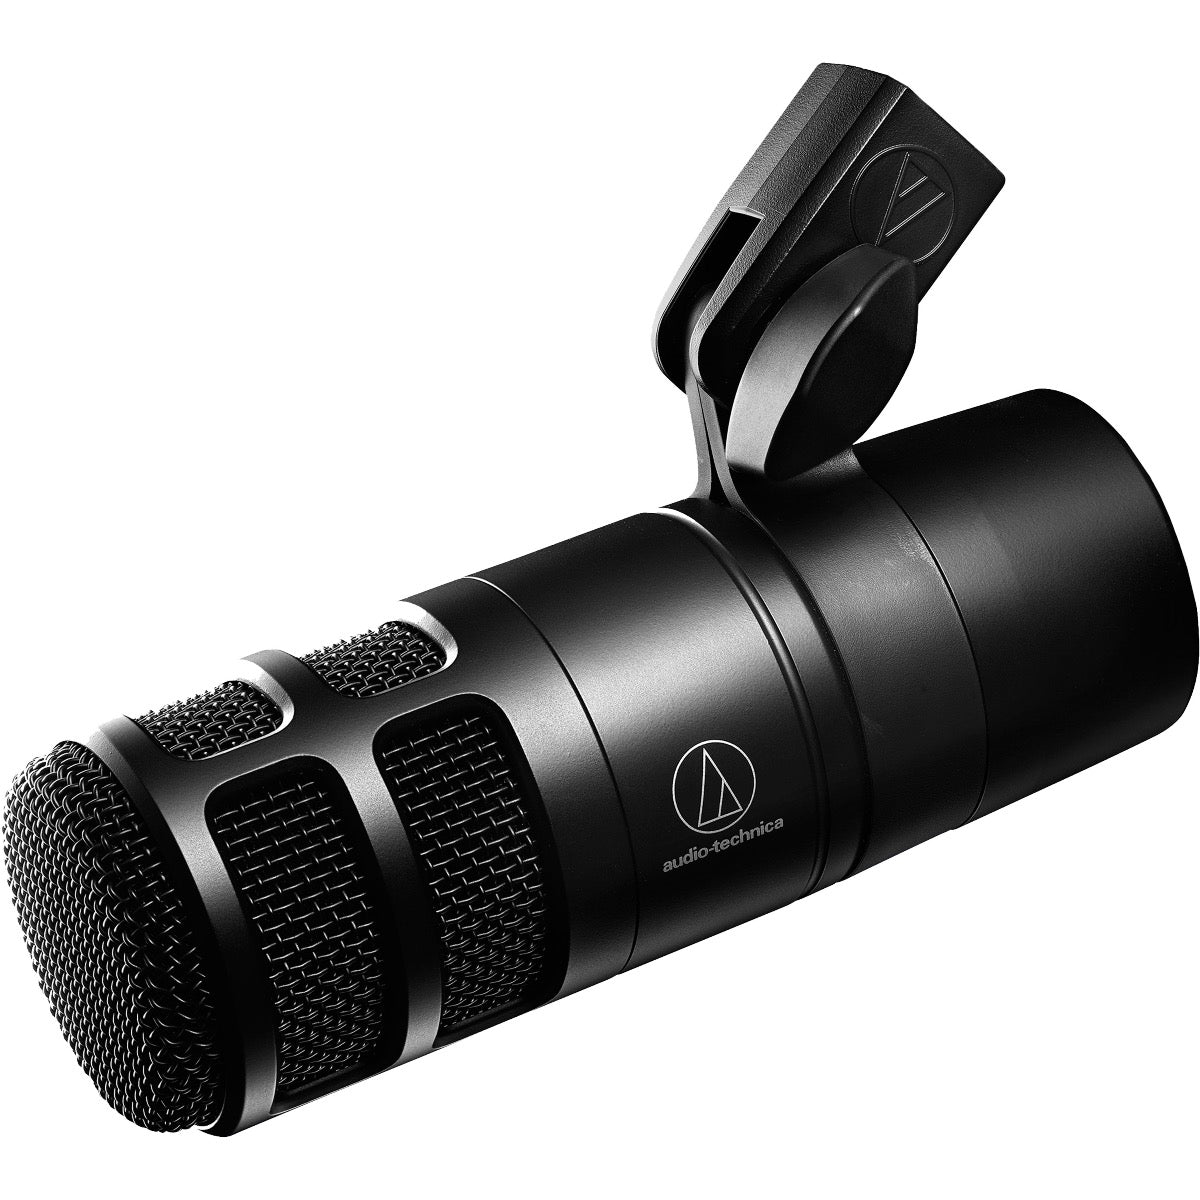 3/4 view of Audio-Technica AT2040 Podcast Microphone showing right side, top and front